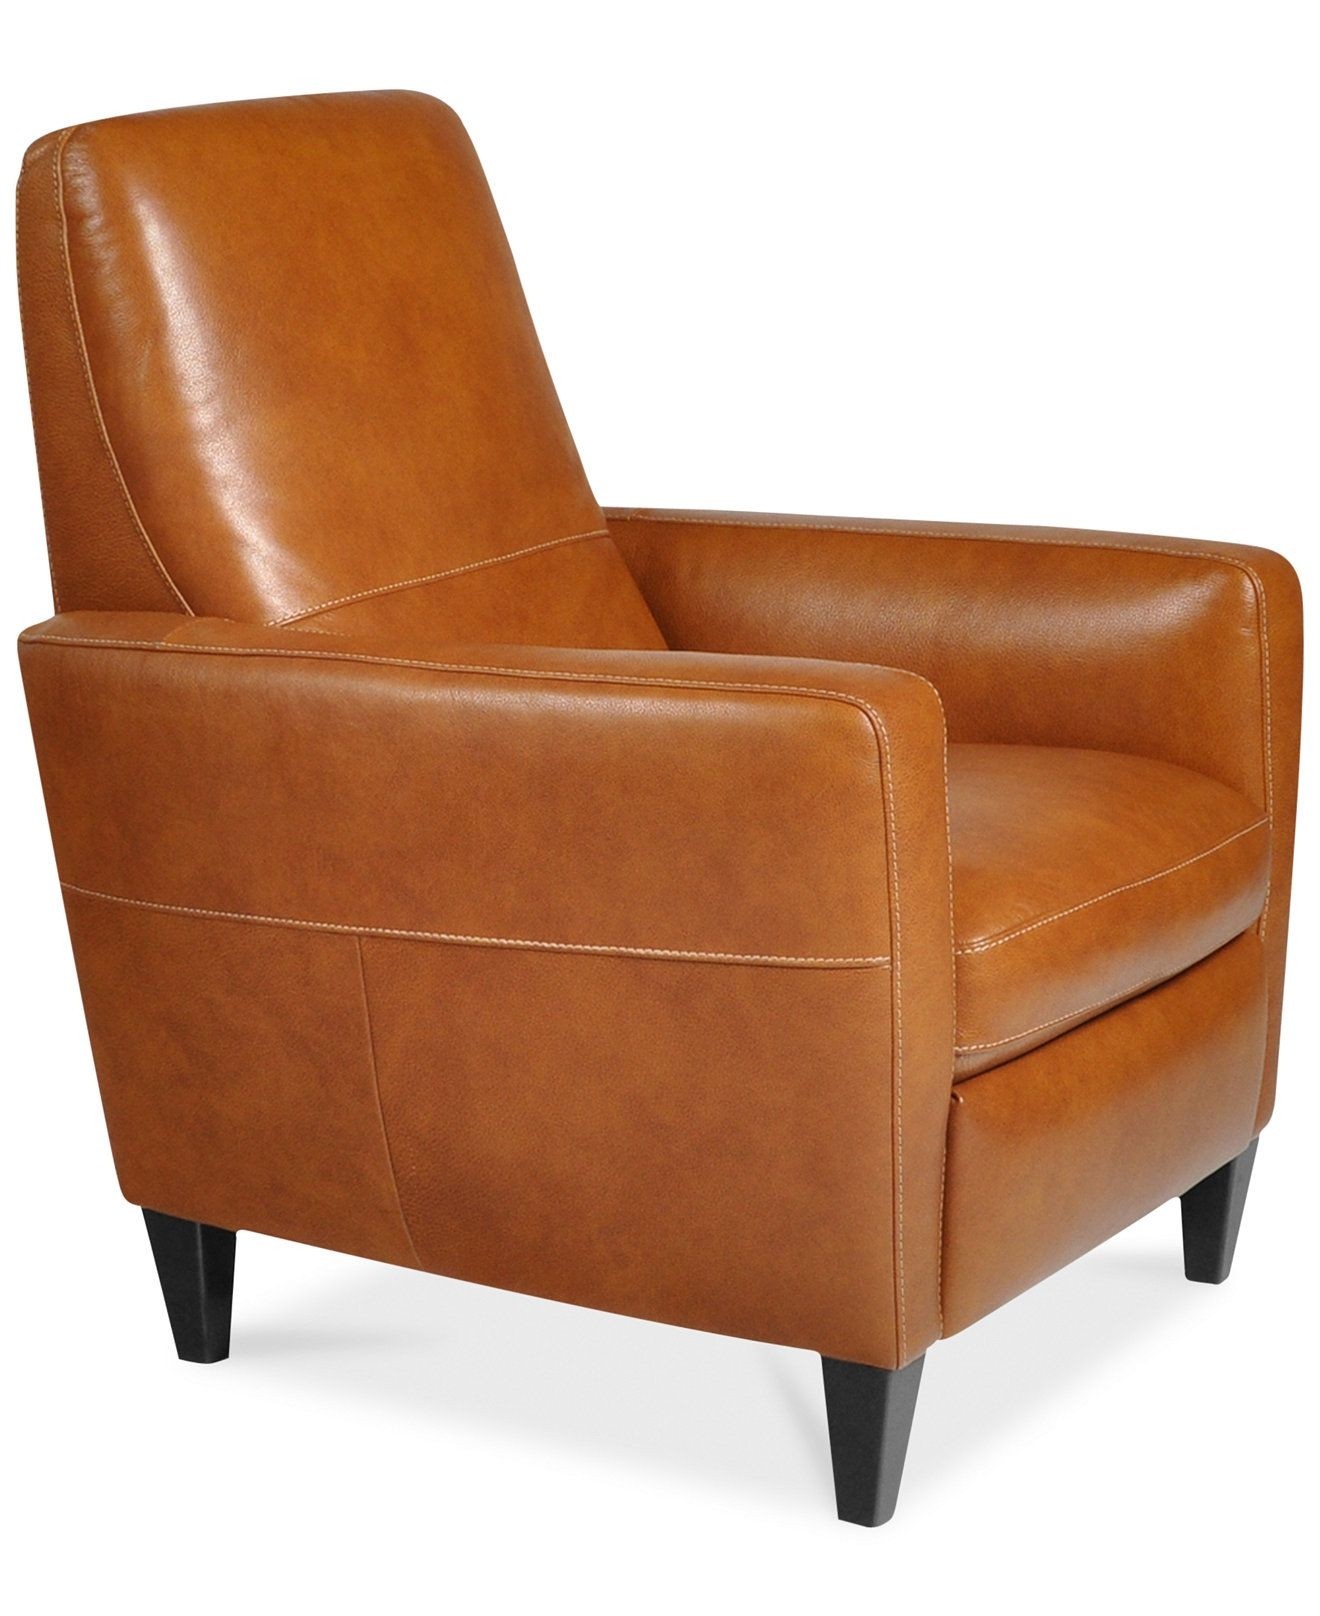 Contemporary leather recliner chairs 1